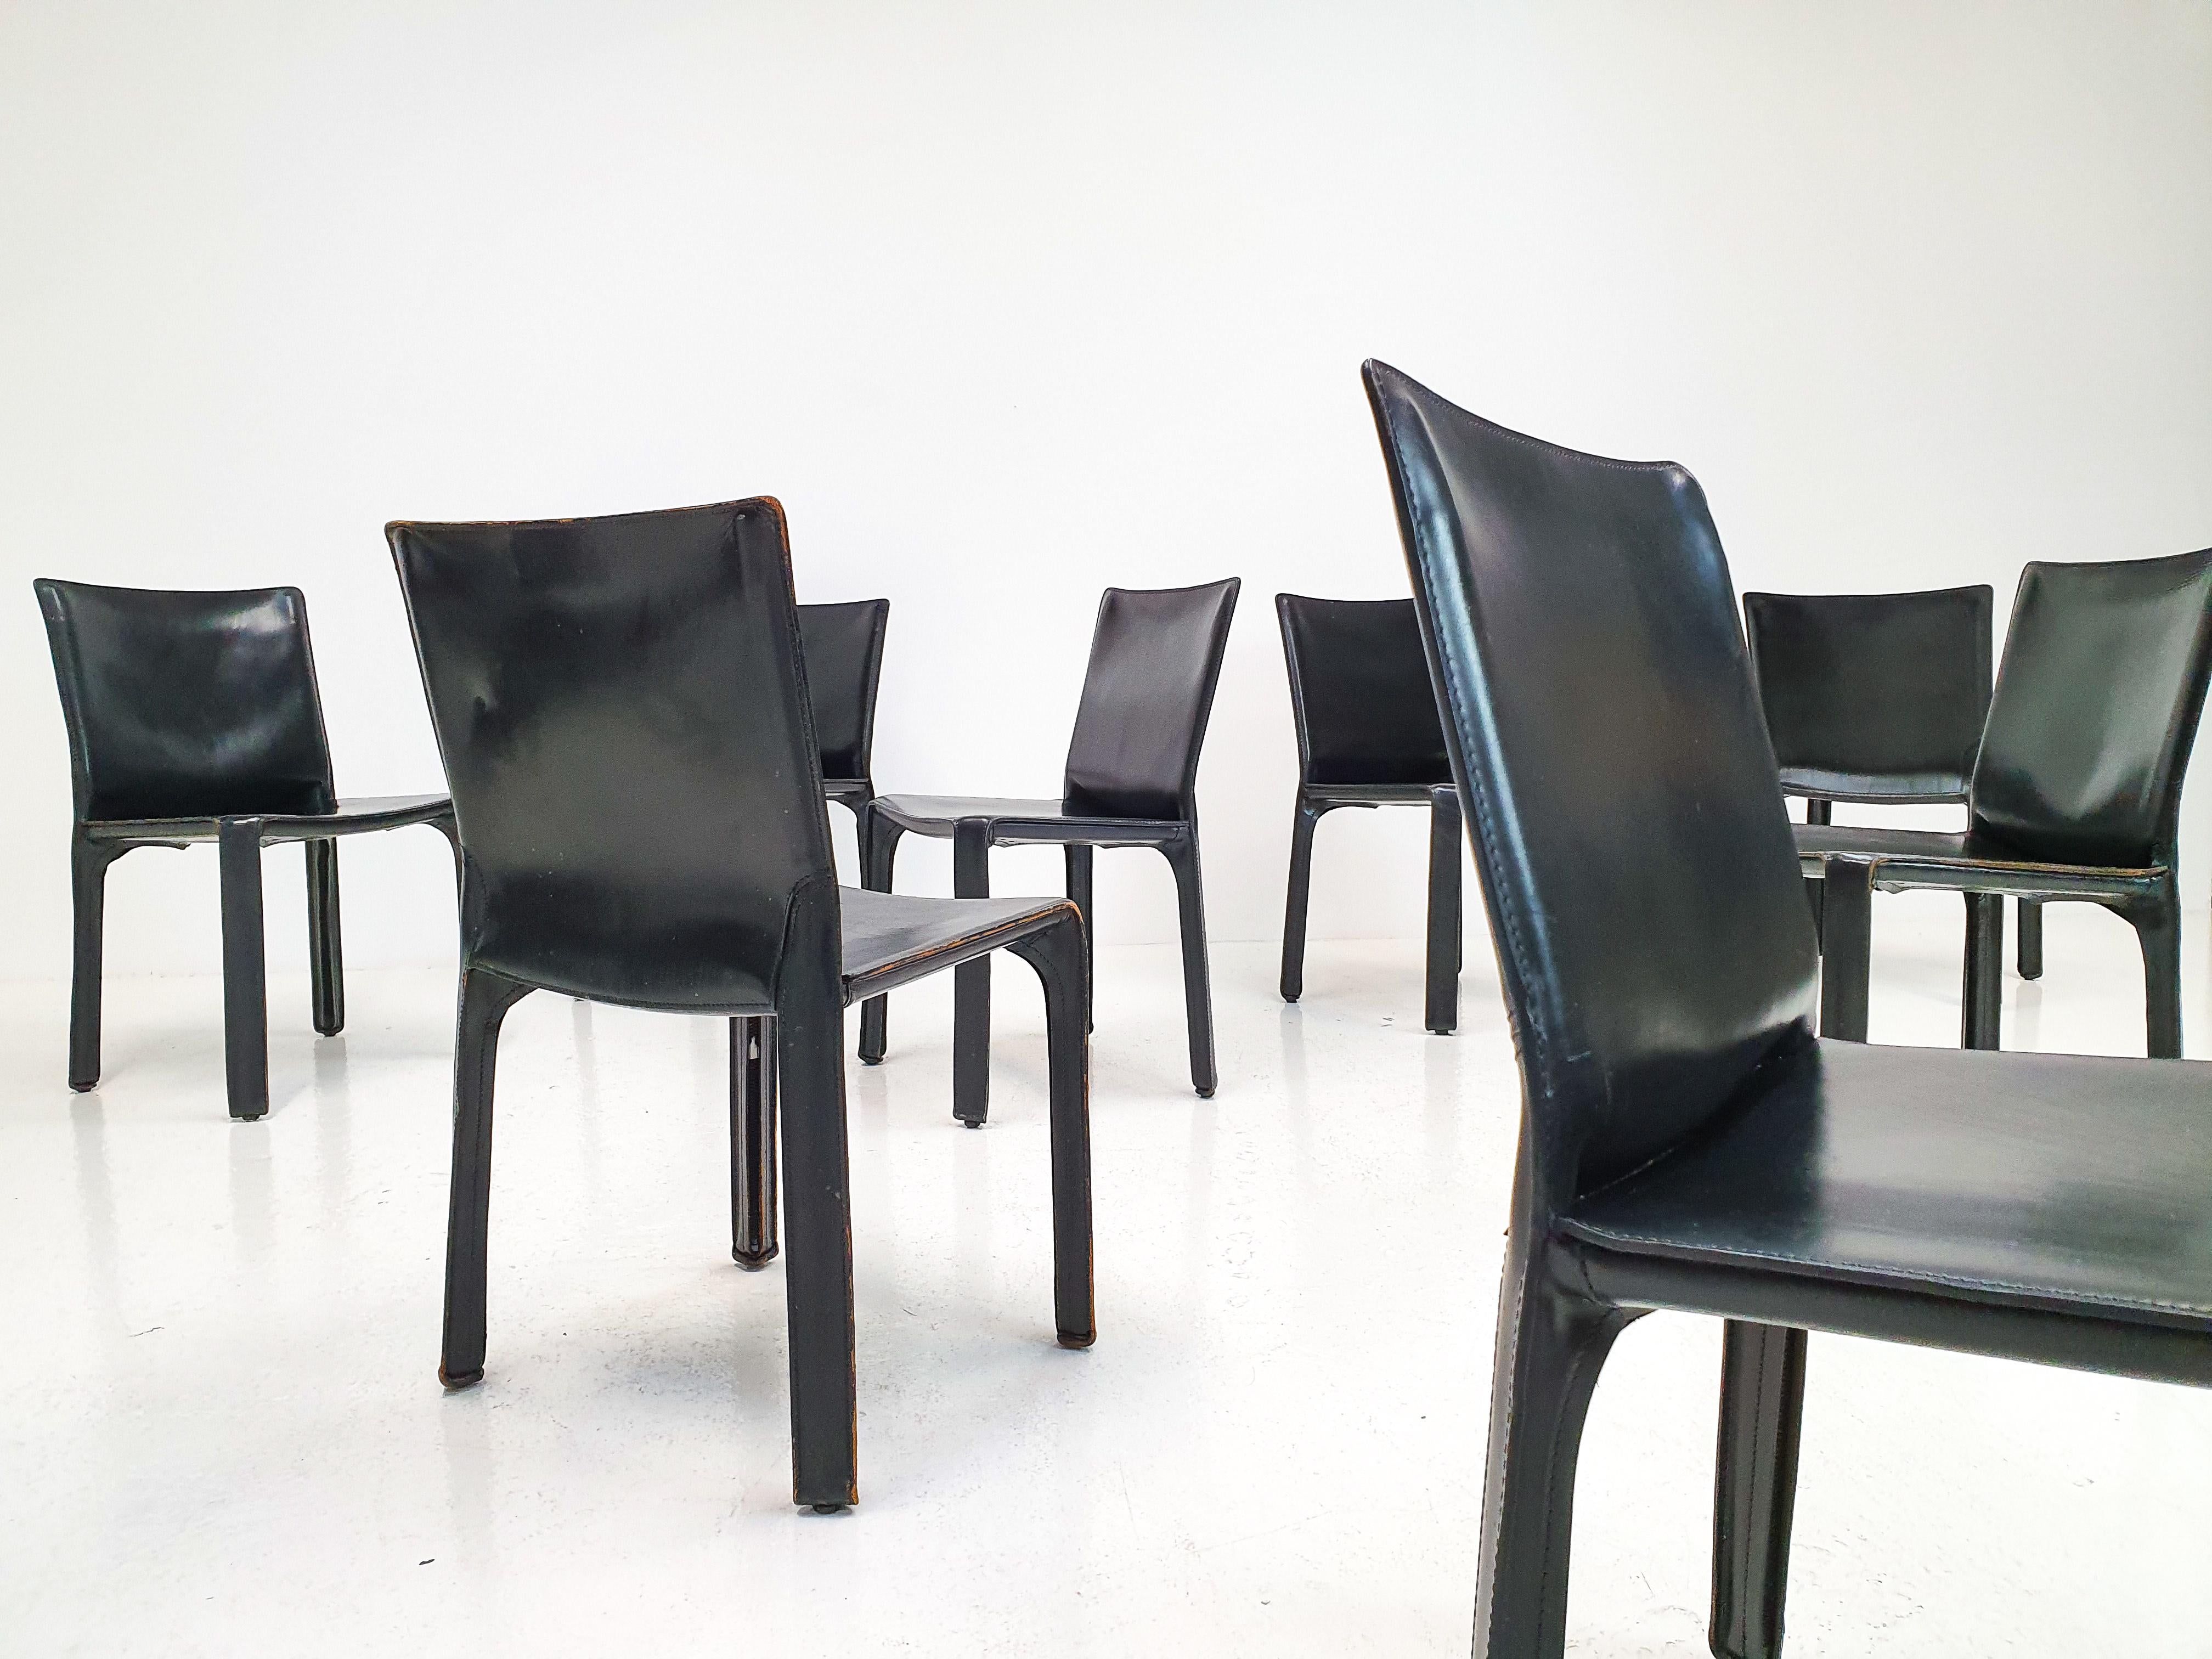 20th Century Set of 8 Mario Bellini Leather CAB Chairs in Black for Cassina, 1977, Italy